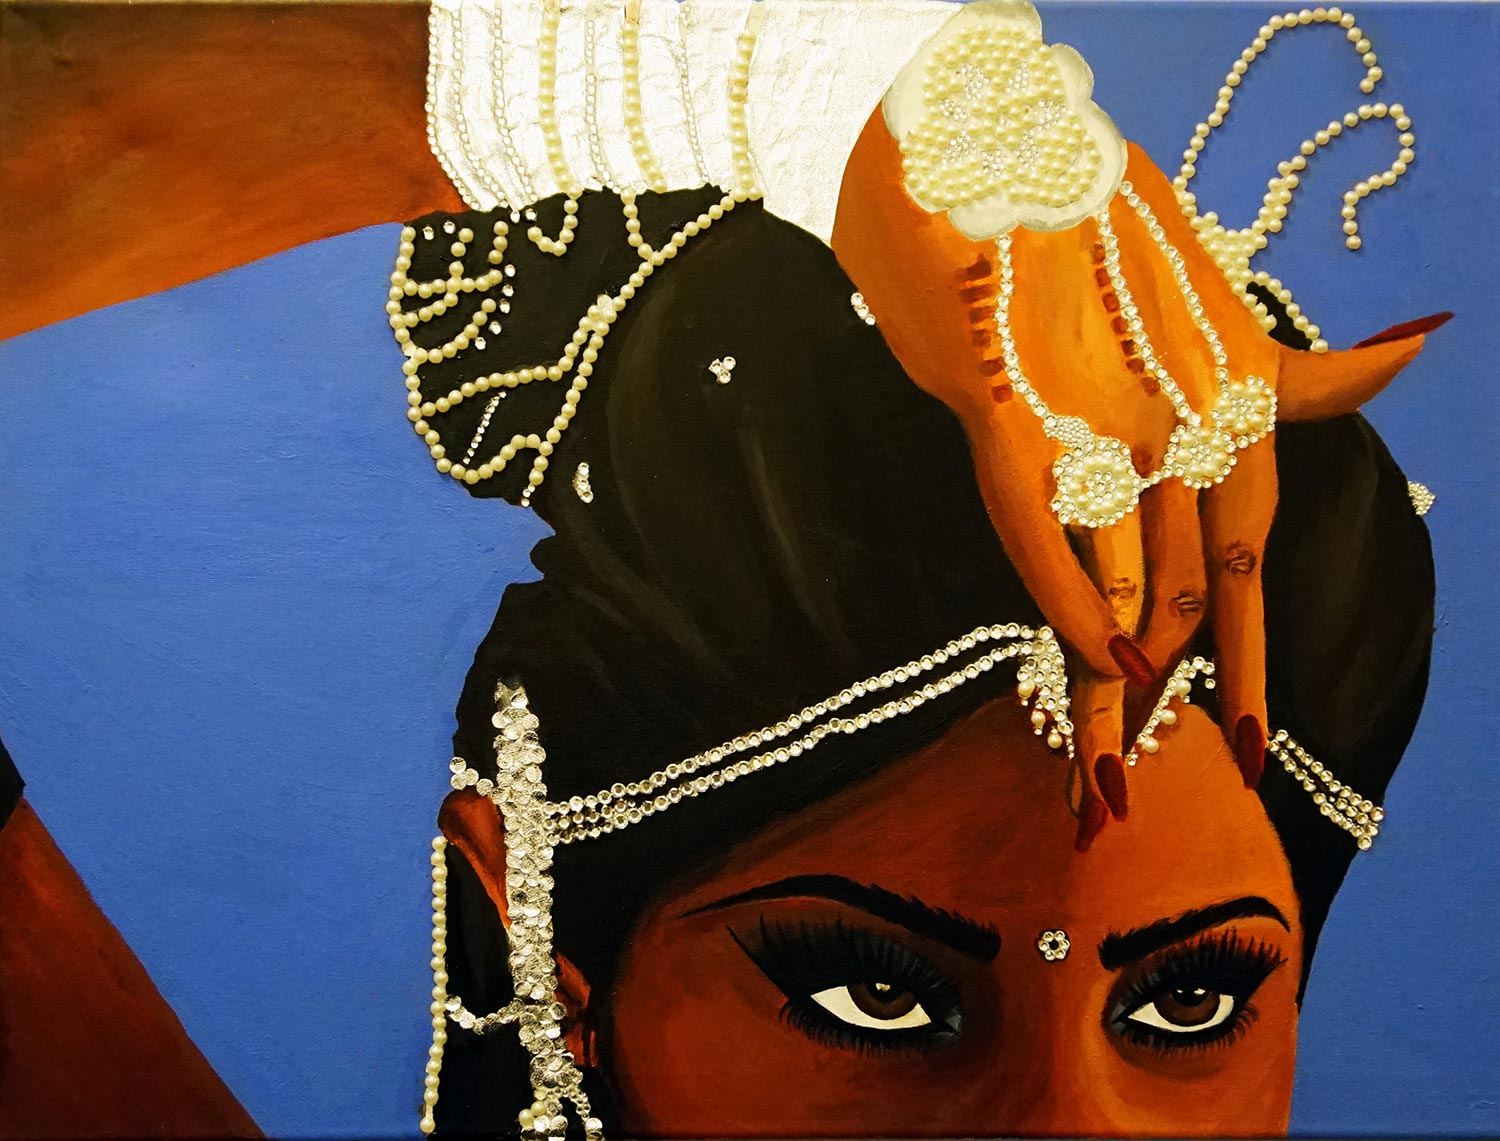 A portrait of a woman's head, with her hand placed so a finger touches her forehead. Her head covering and hand are adorned with jewels